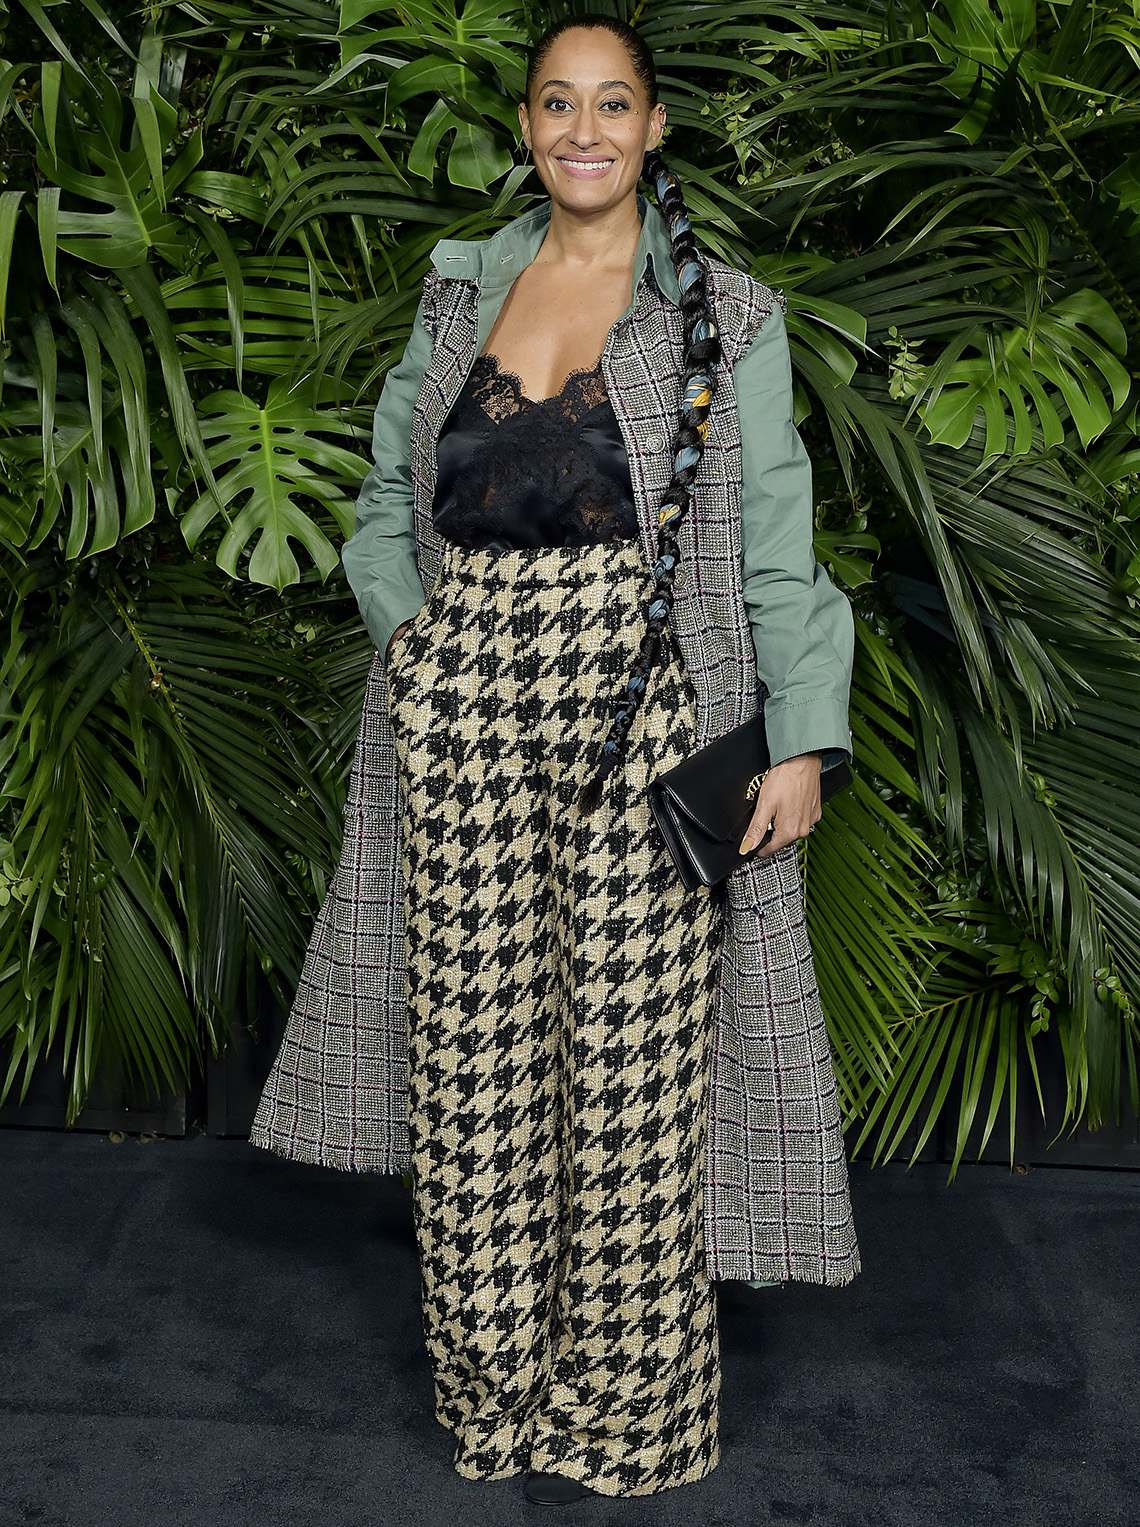 https://www.aarp.org/content/dam/aarp/entertainment/beauty-and-style/2022/10/1140x1527-tracee-ellis-ross-chanel.jpg